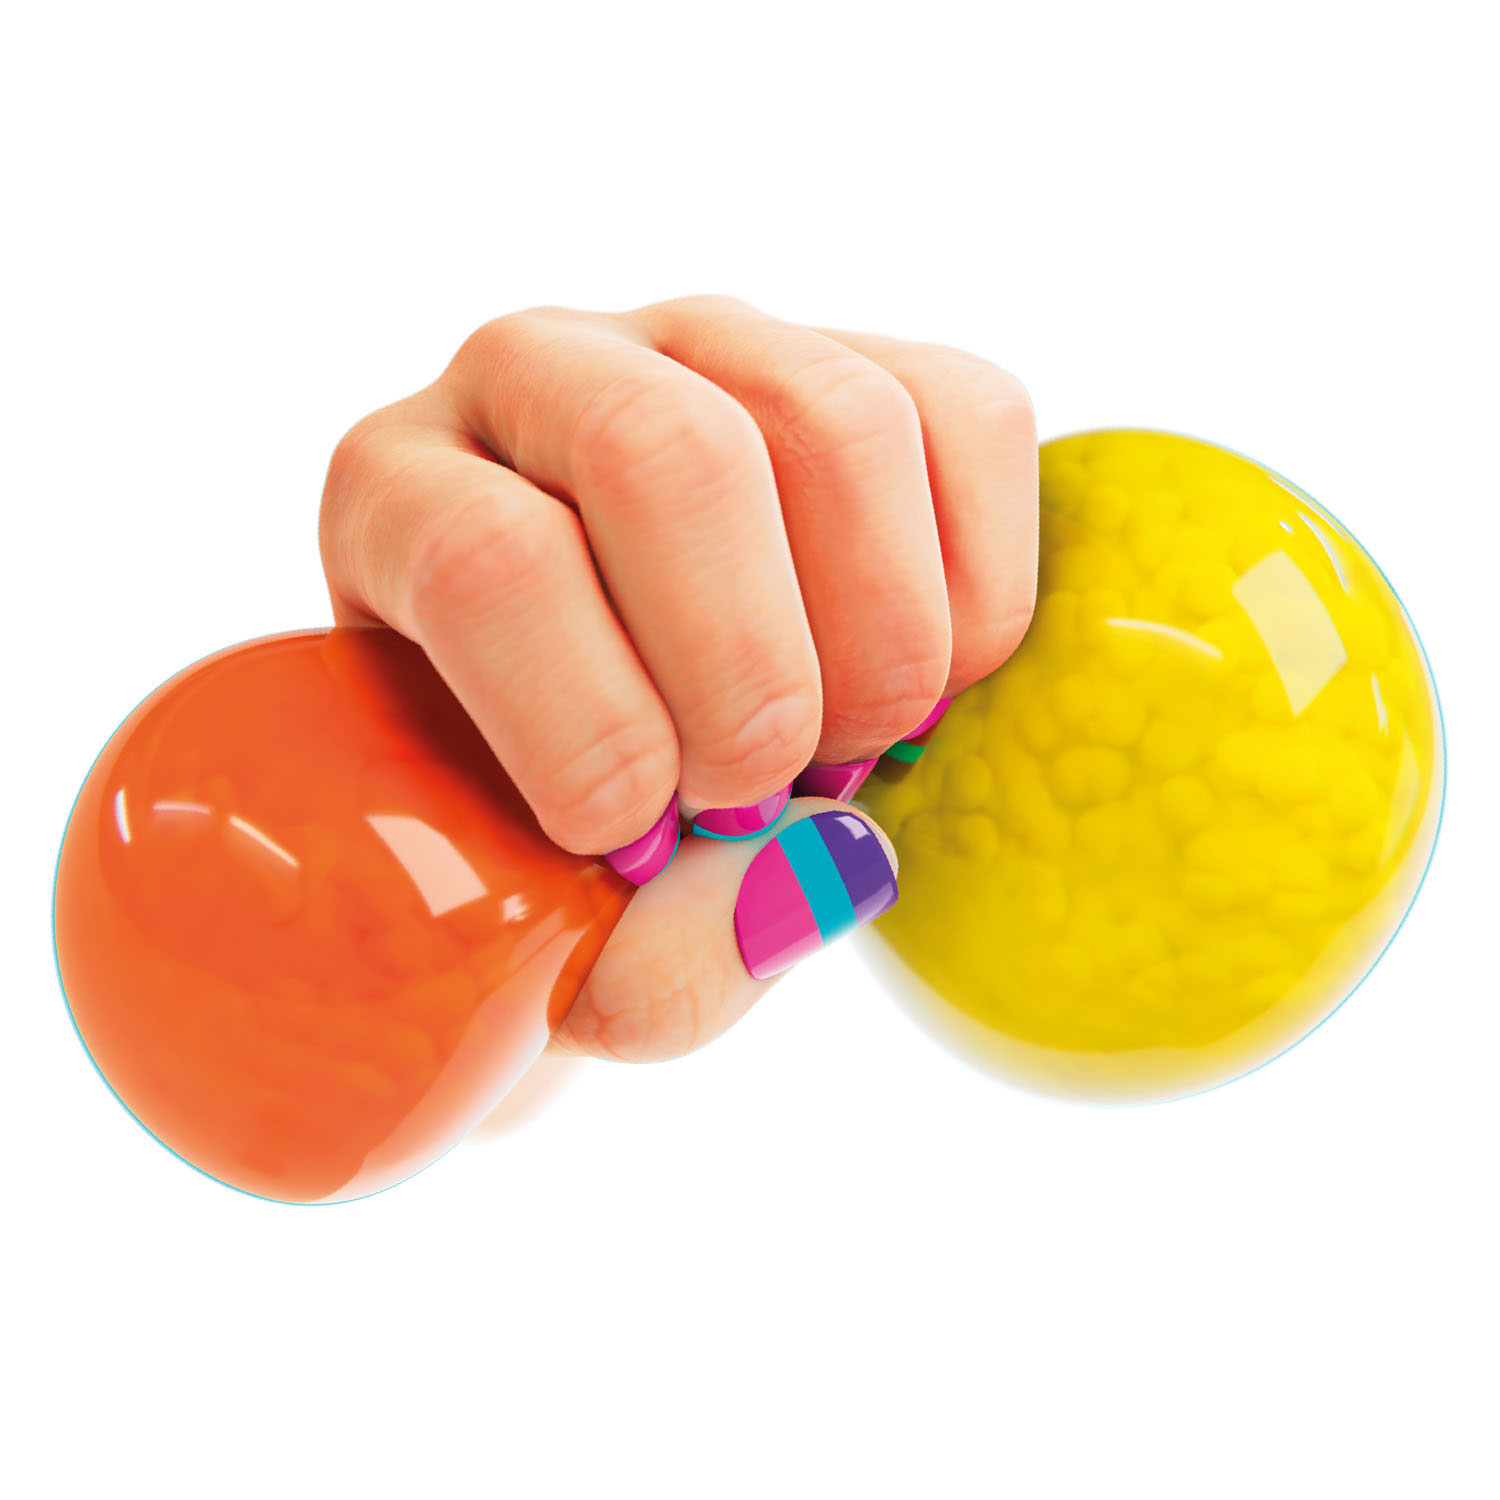 Get squishiliscious with the Doctor Squish Squishy Maker